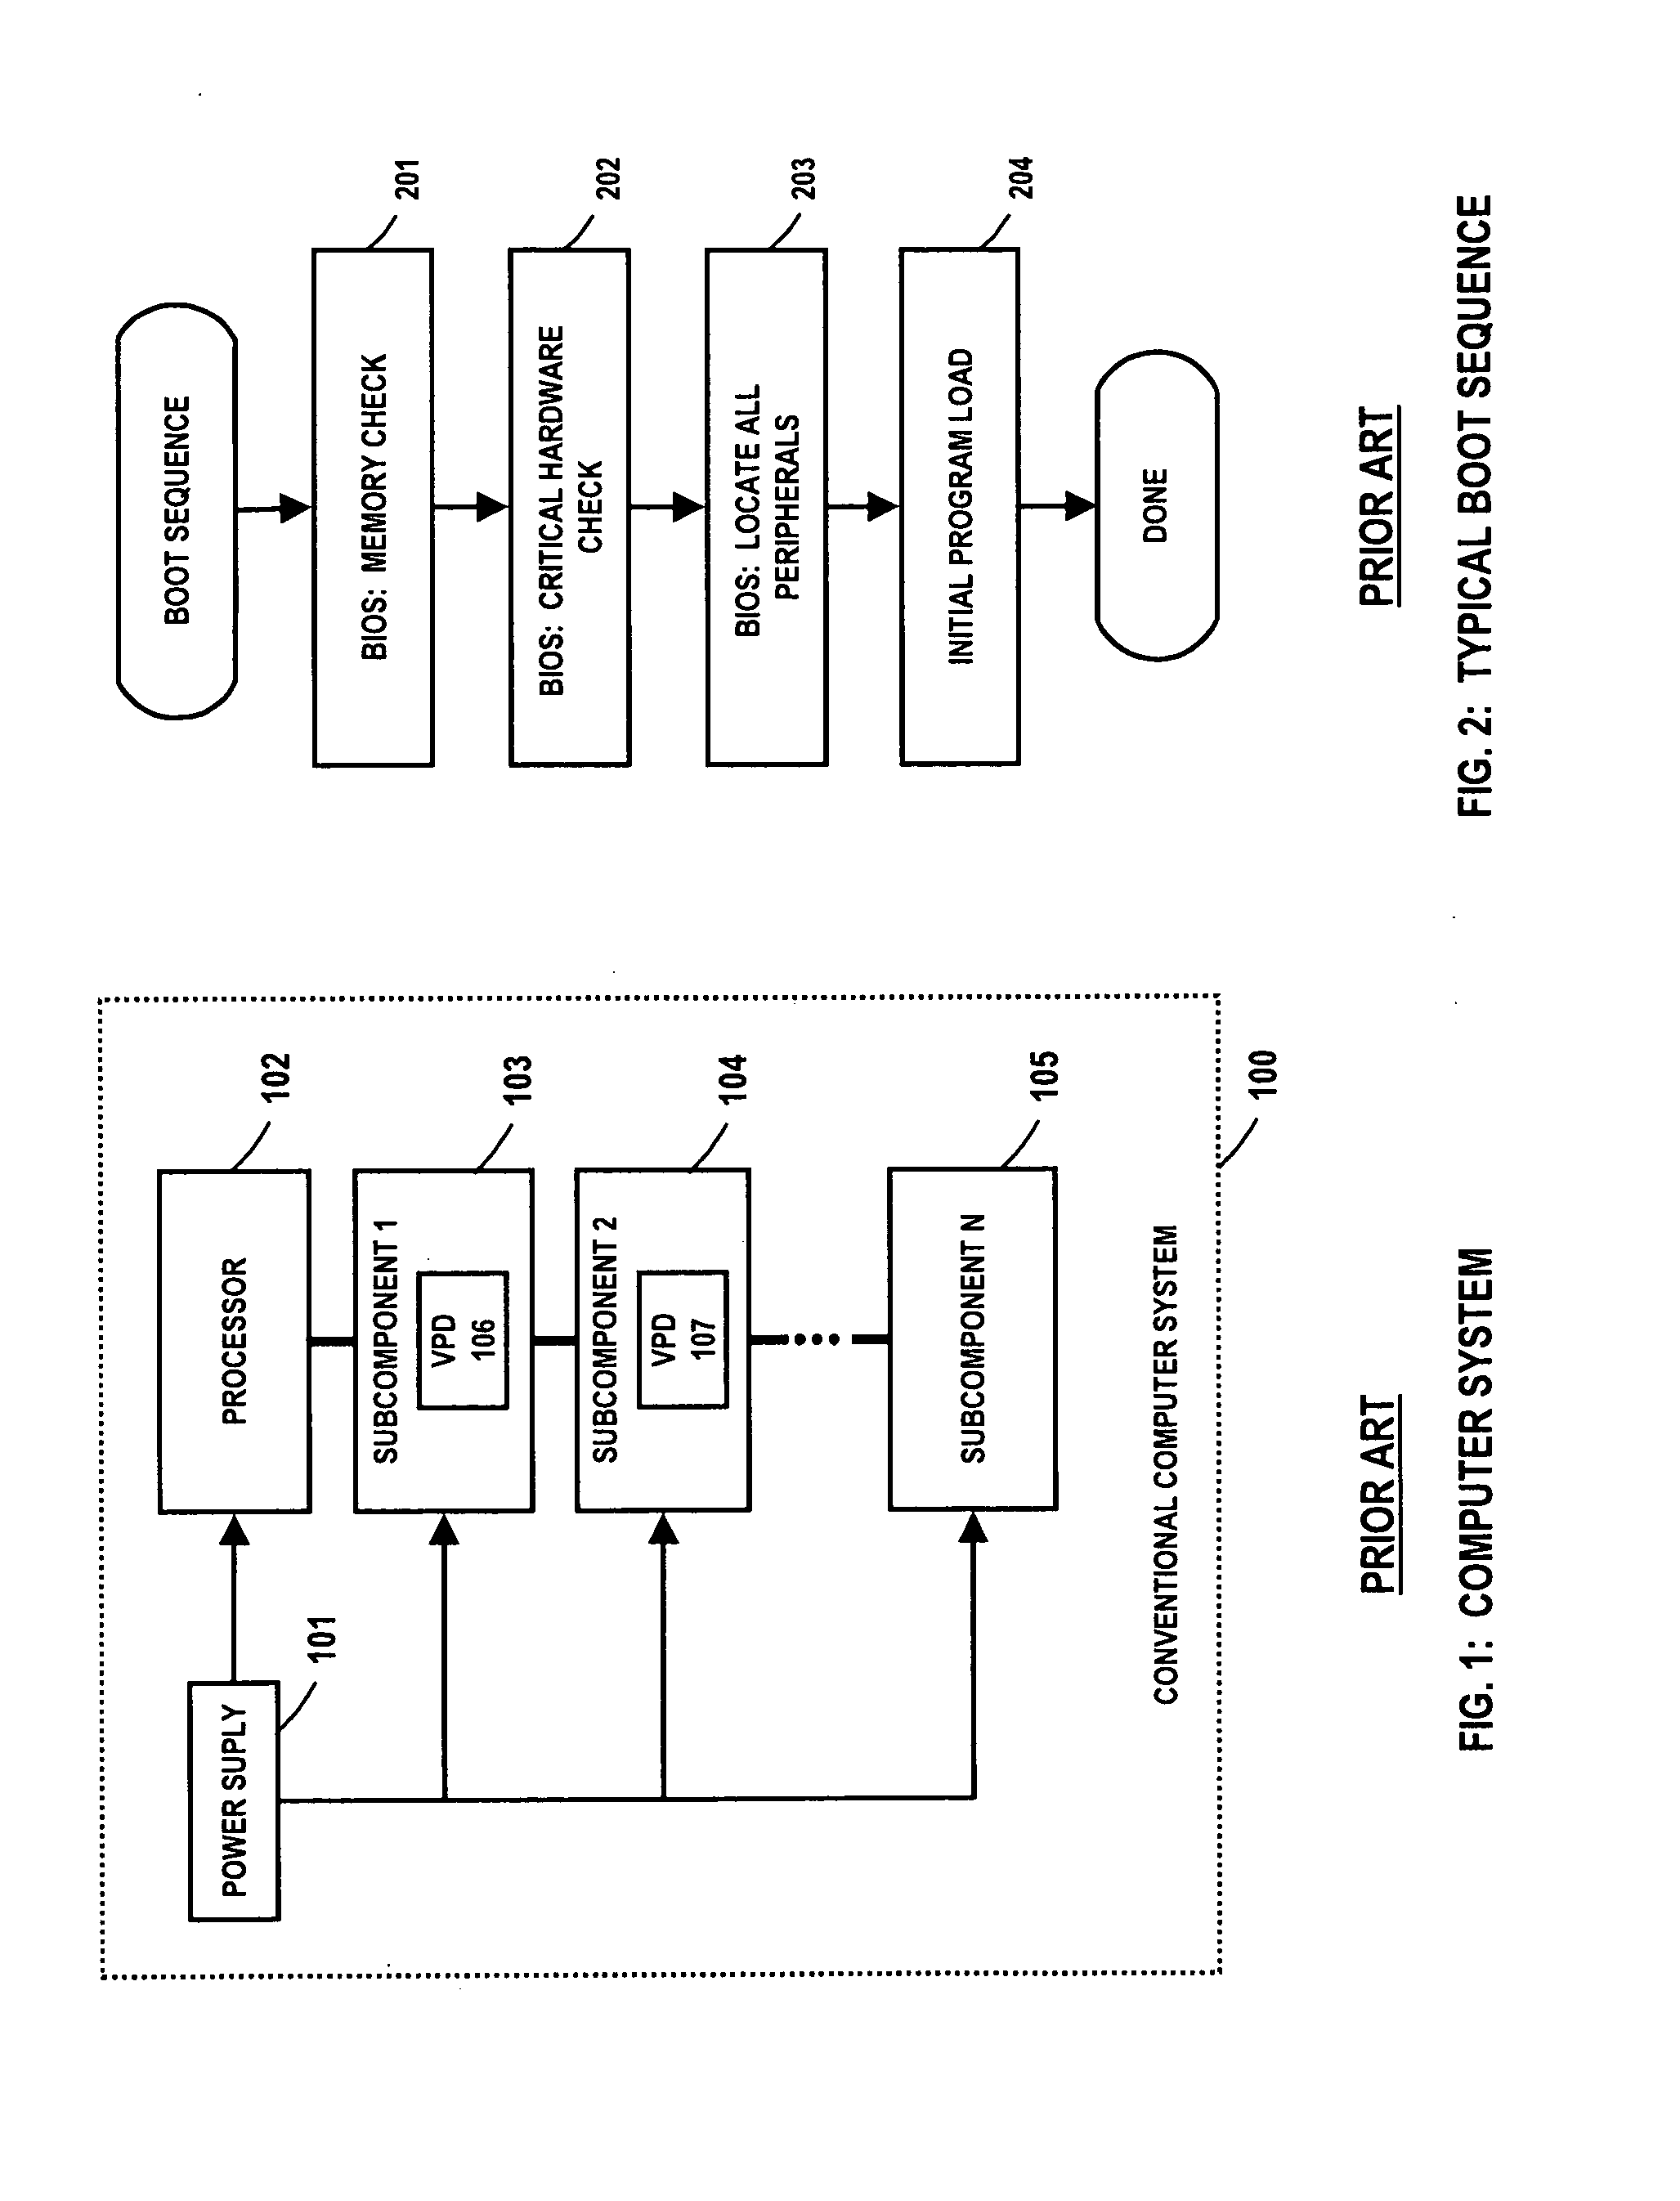 Method for estimating total power requirement in a computer system